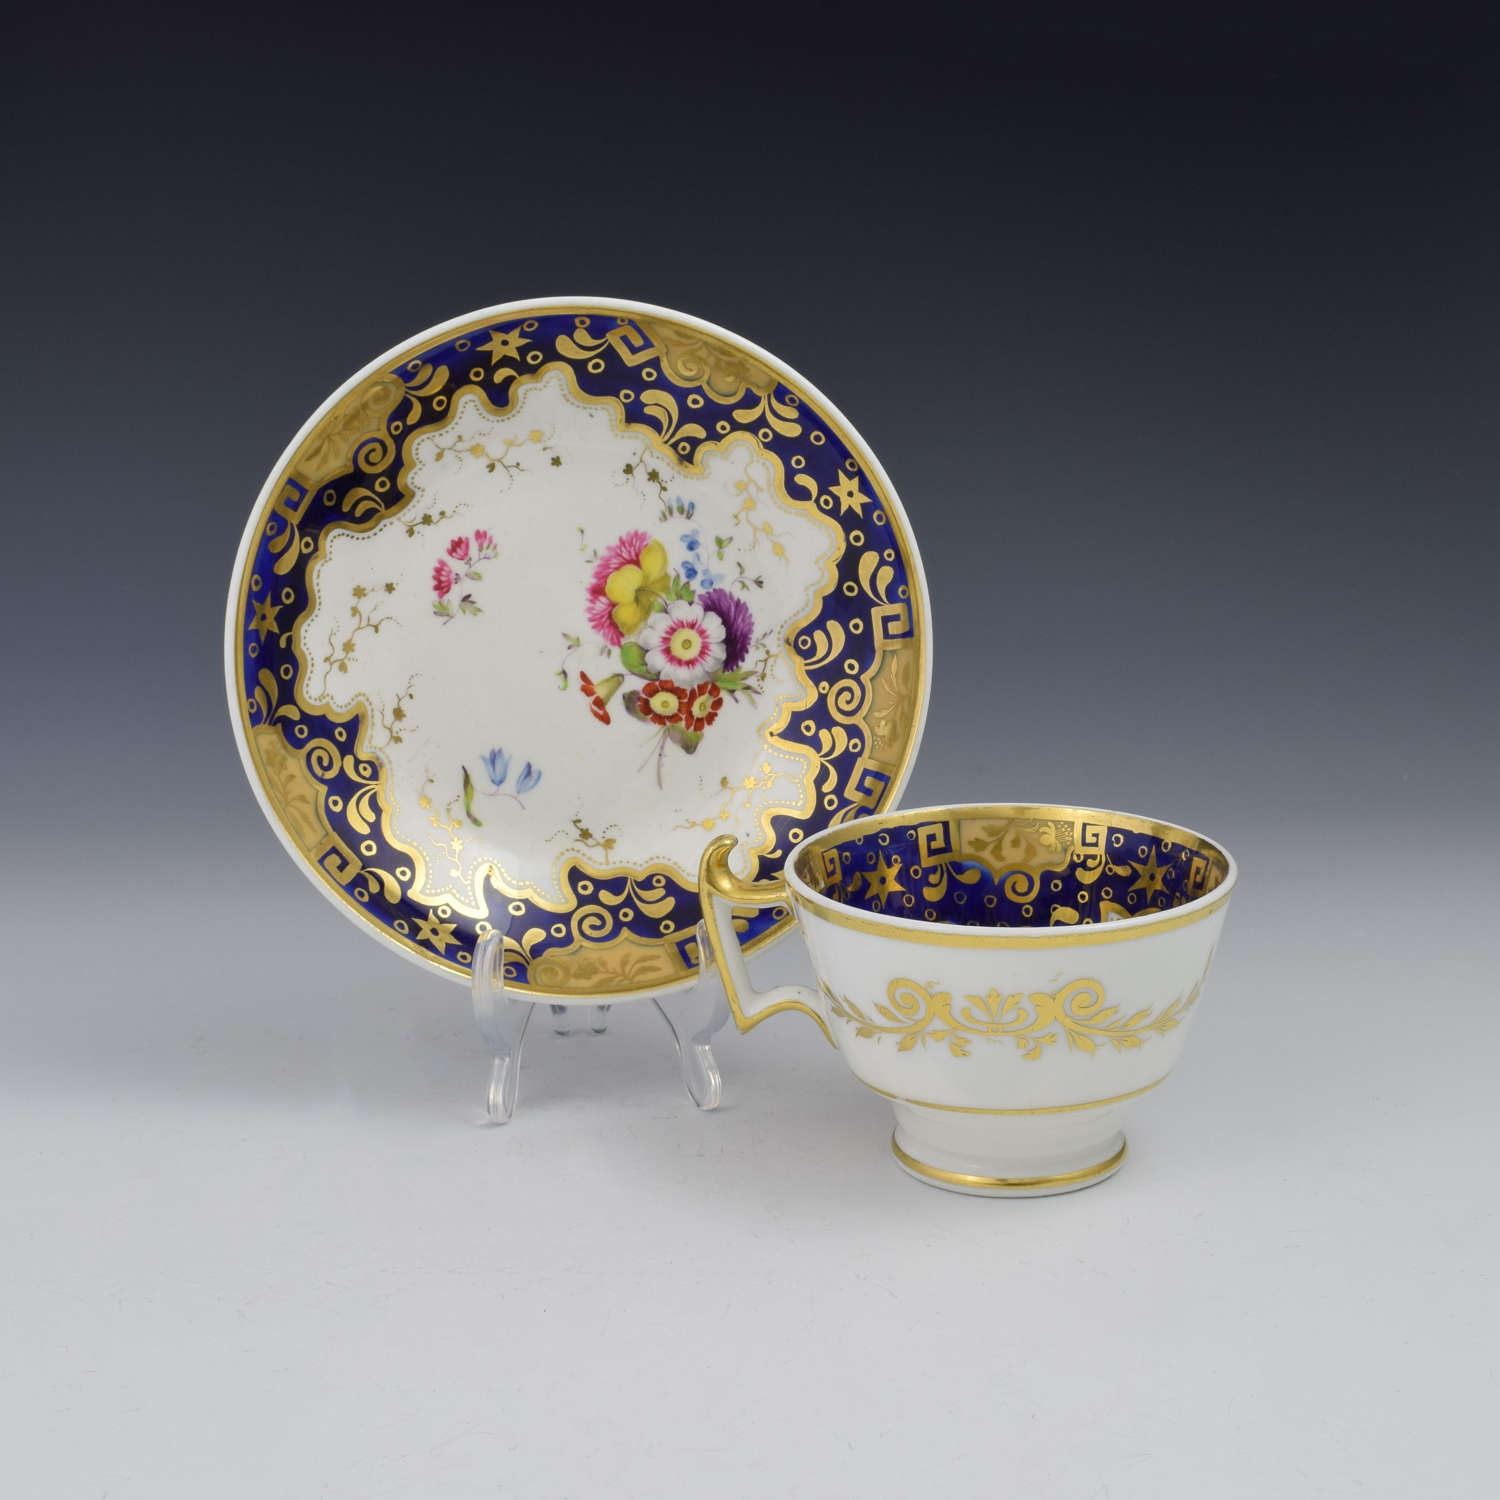 Ridgway Porcelain Coffee Cup & Saucer Pattern 2/739 c.1825